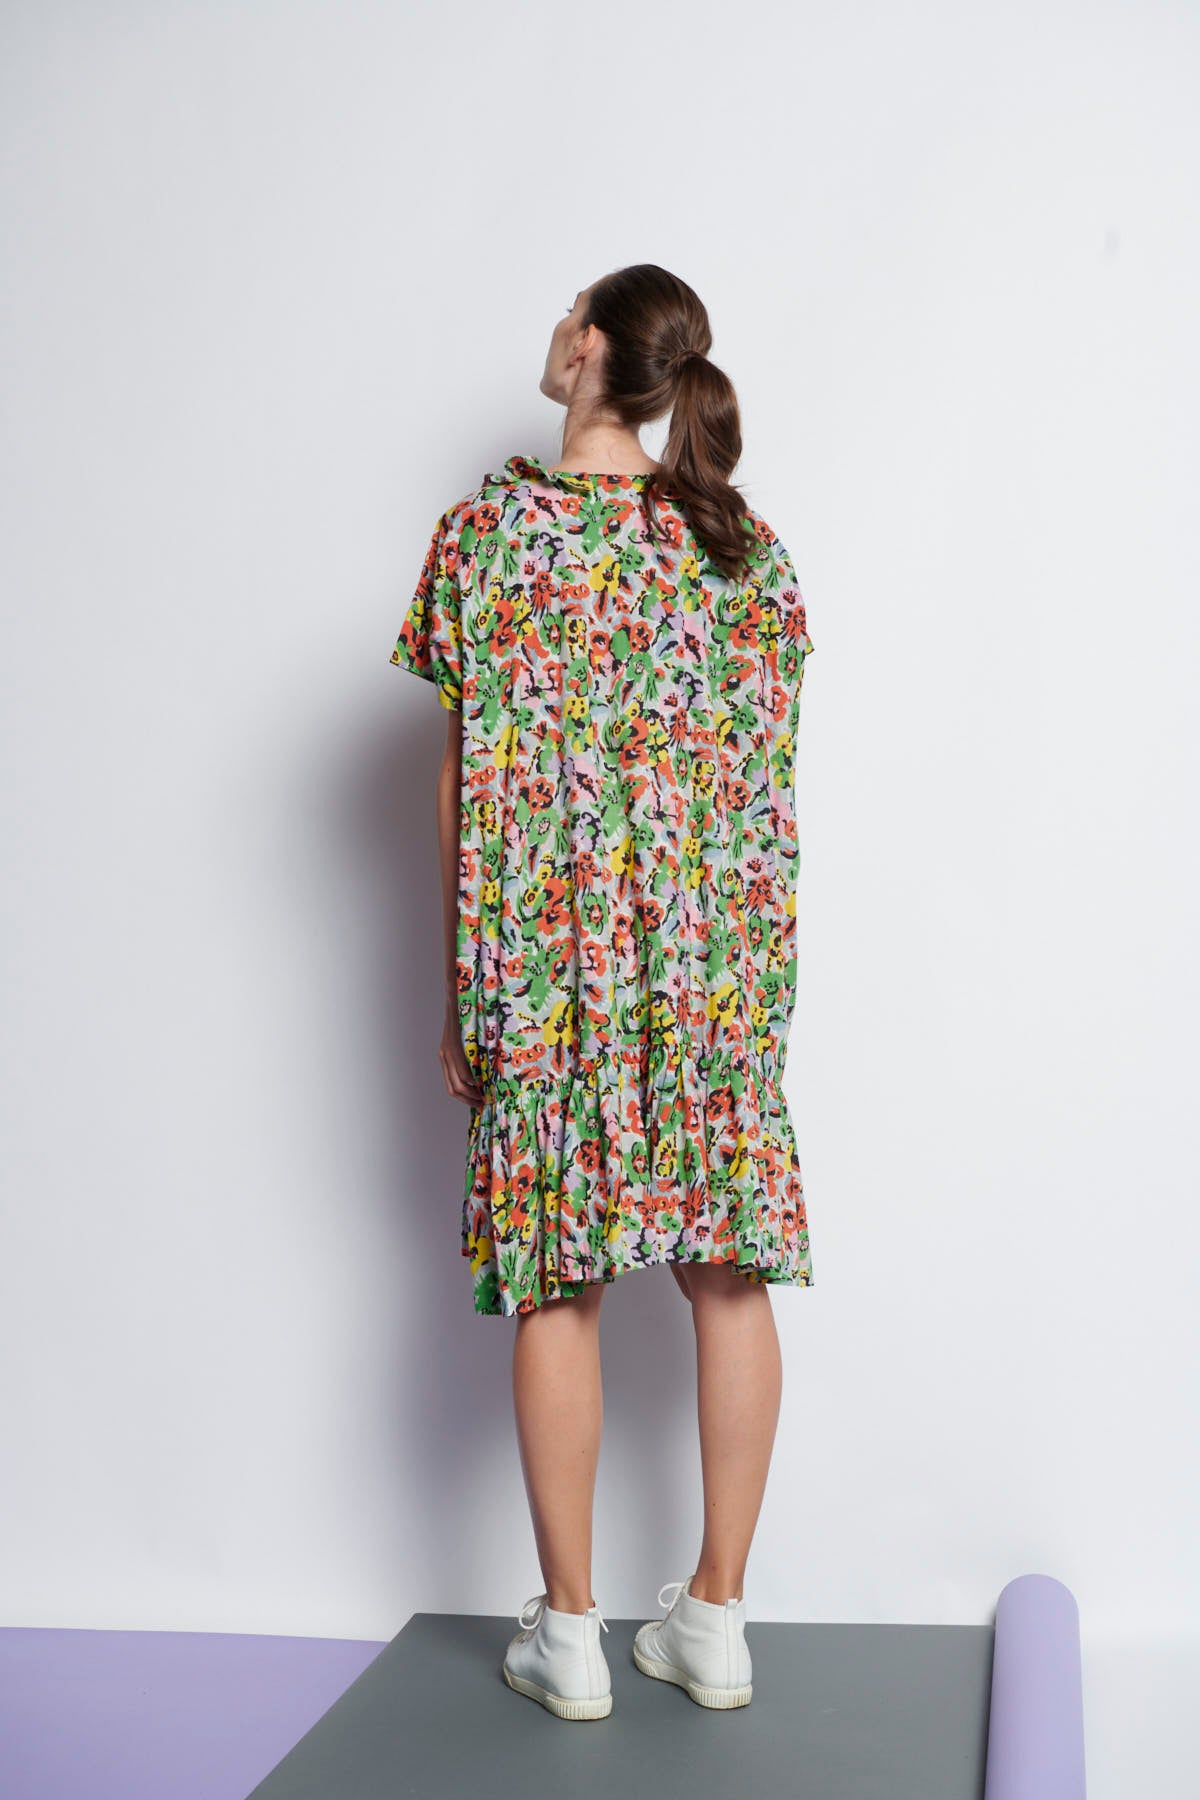 A floral, easy-fit, knee-length summer dress made of cotton and has ruffled neckline and gathers at hem